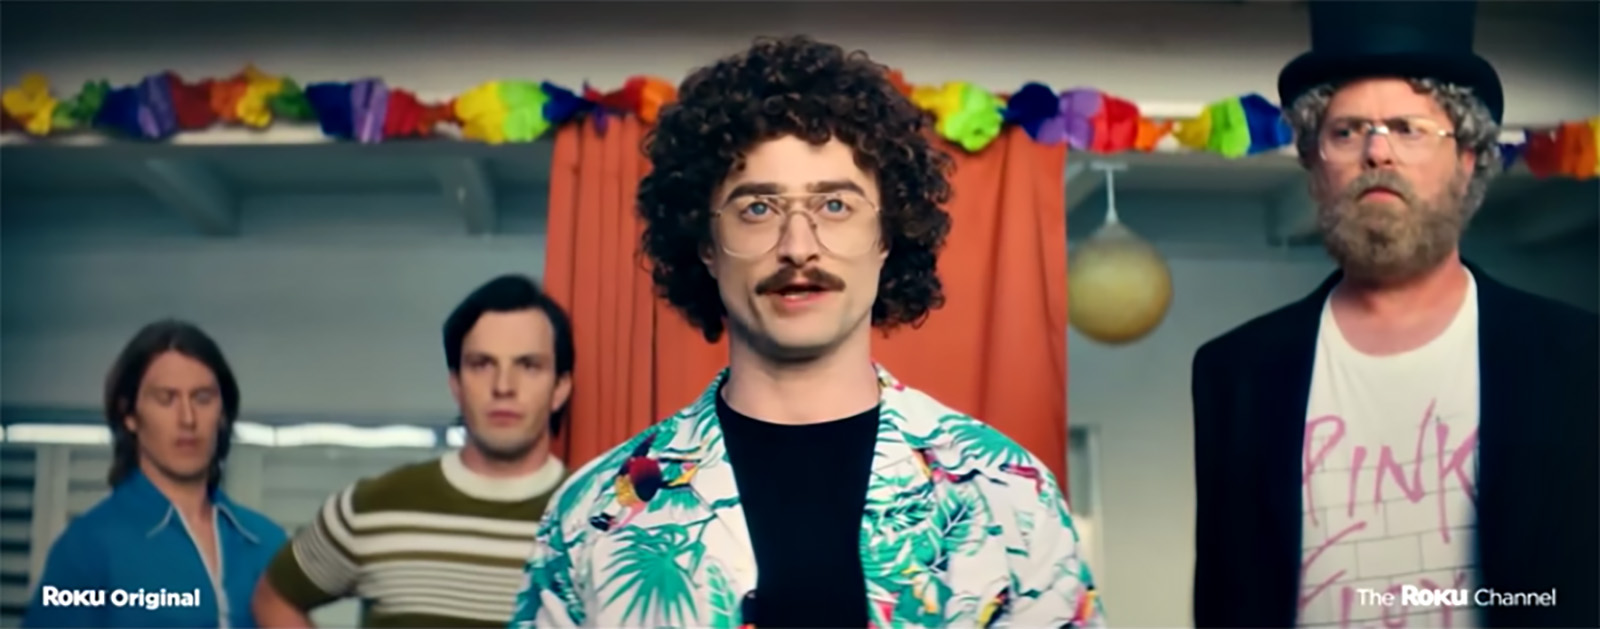 PHOTO: Daniel Radcliffe as Weird Al in upcoming biopic on The Roku Channel.